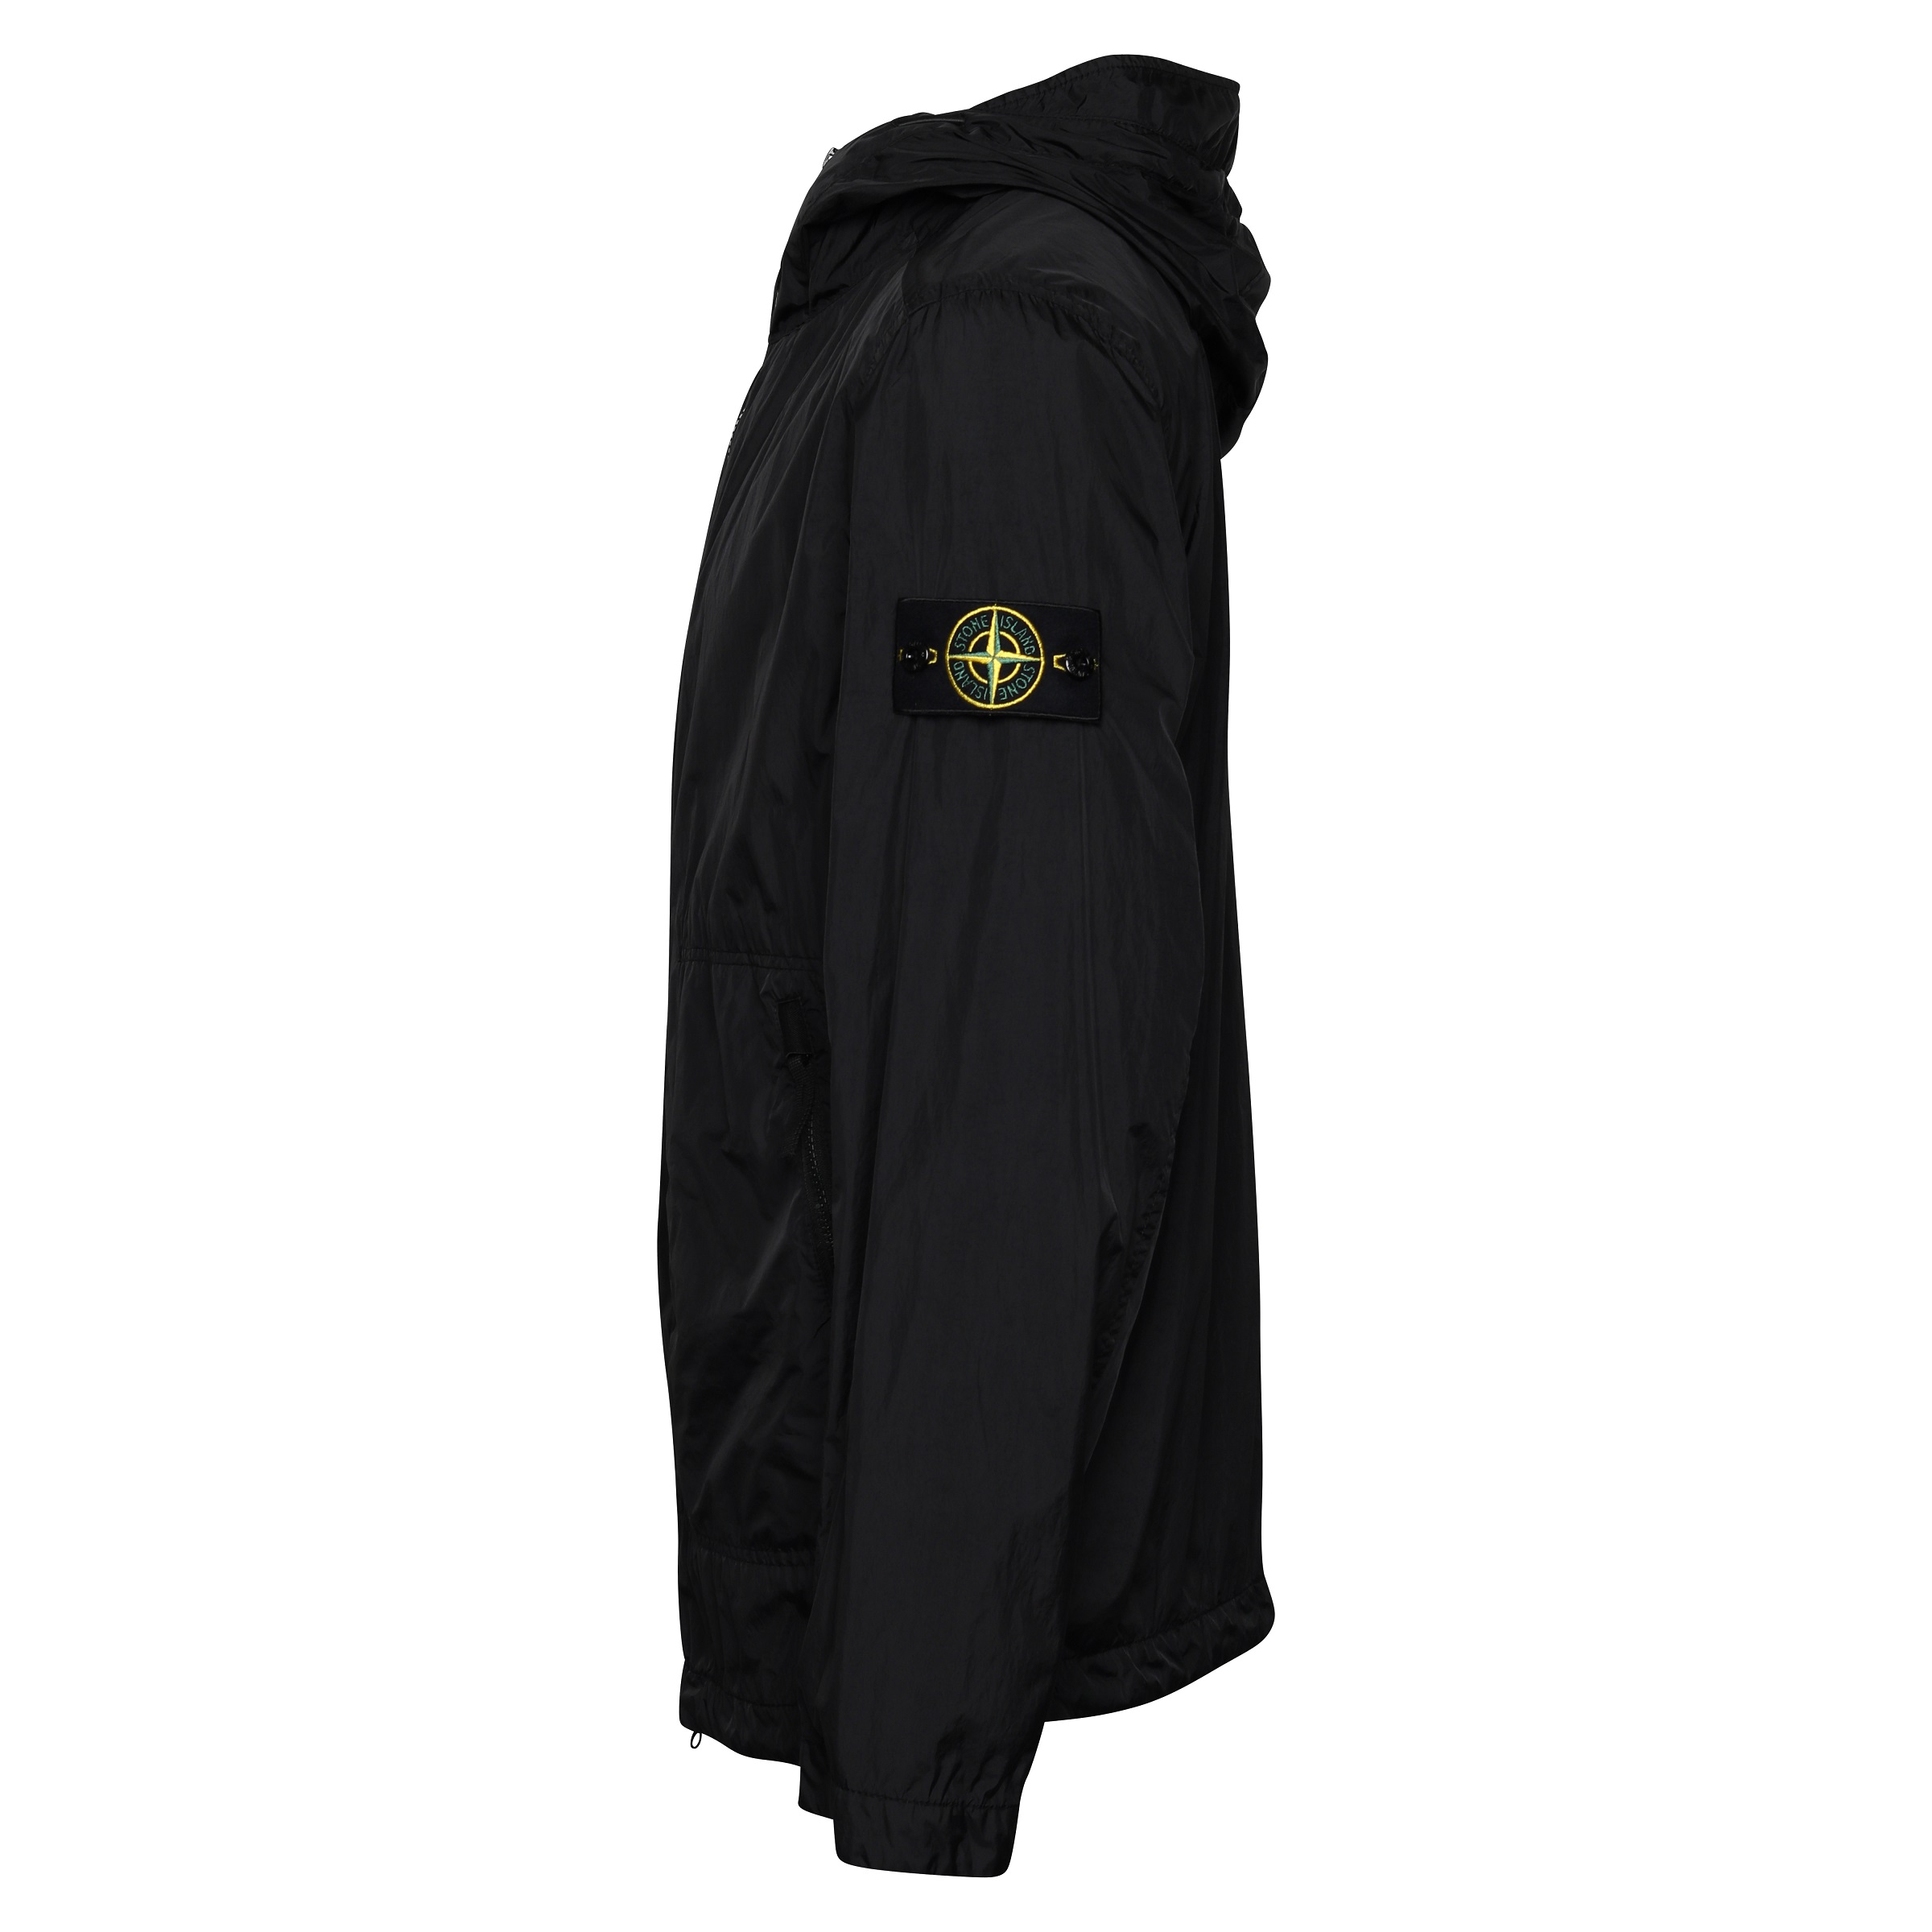 Stone Island Garment Dyed Crinkle Reps Hooded Light Jacket in Black 3XL